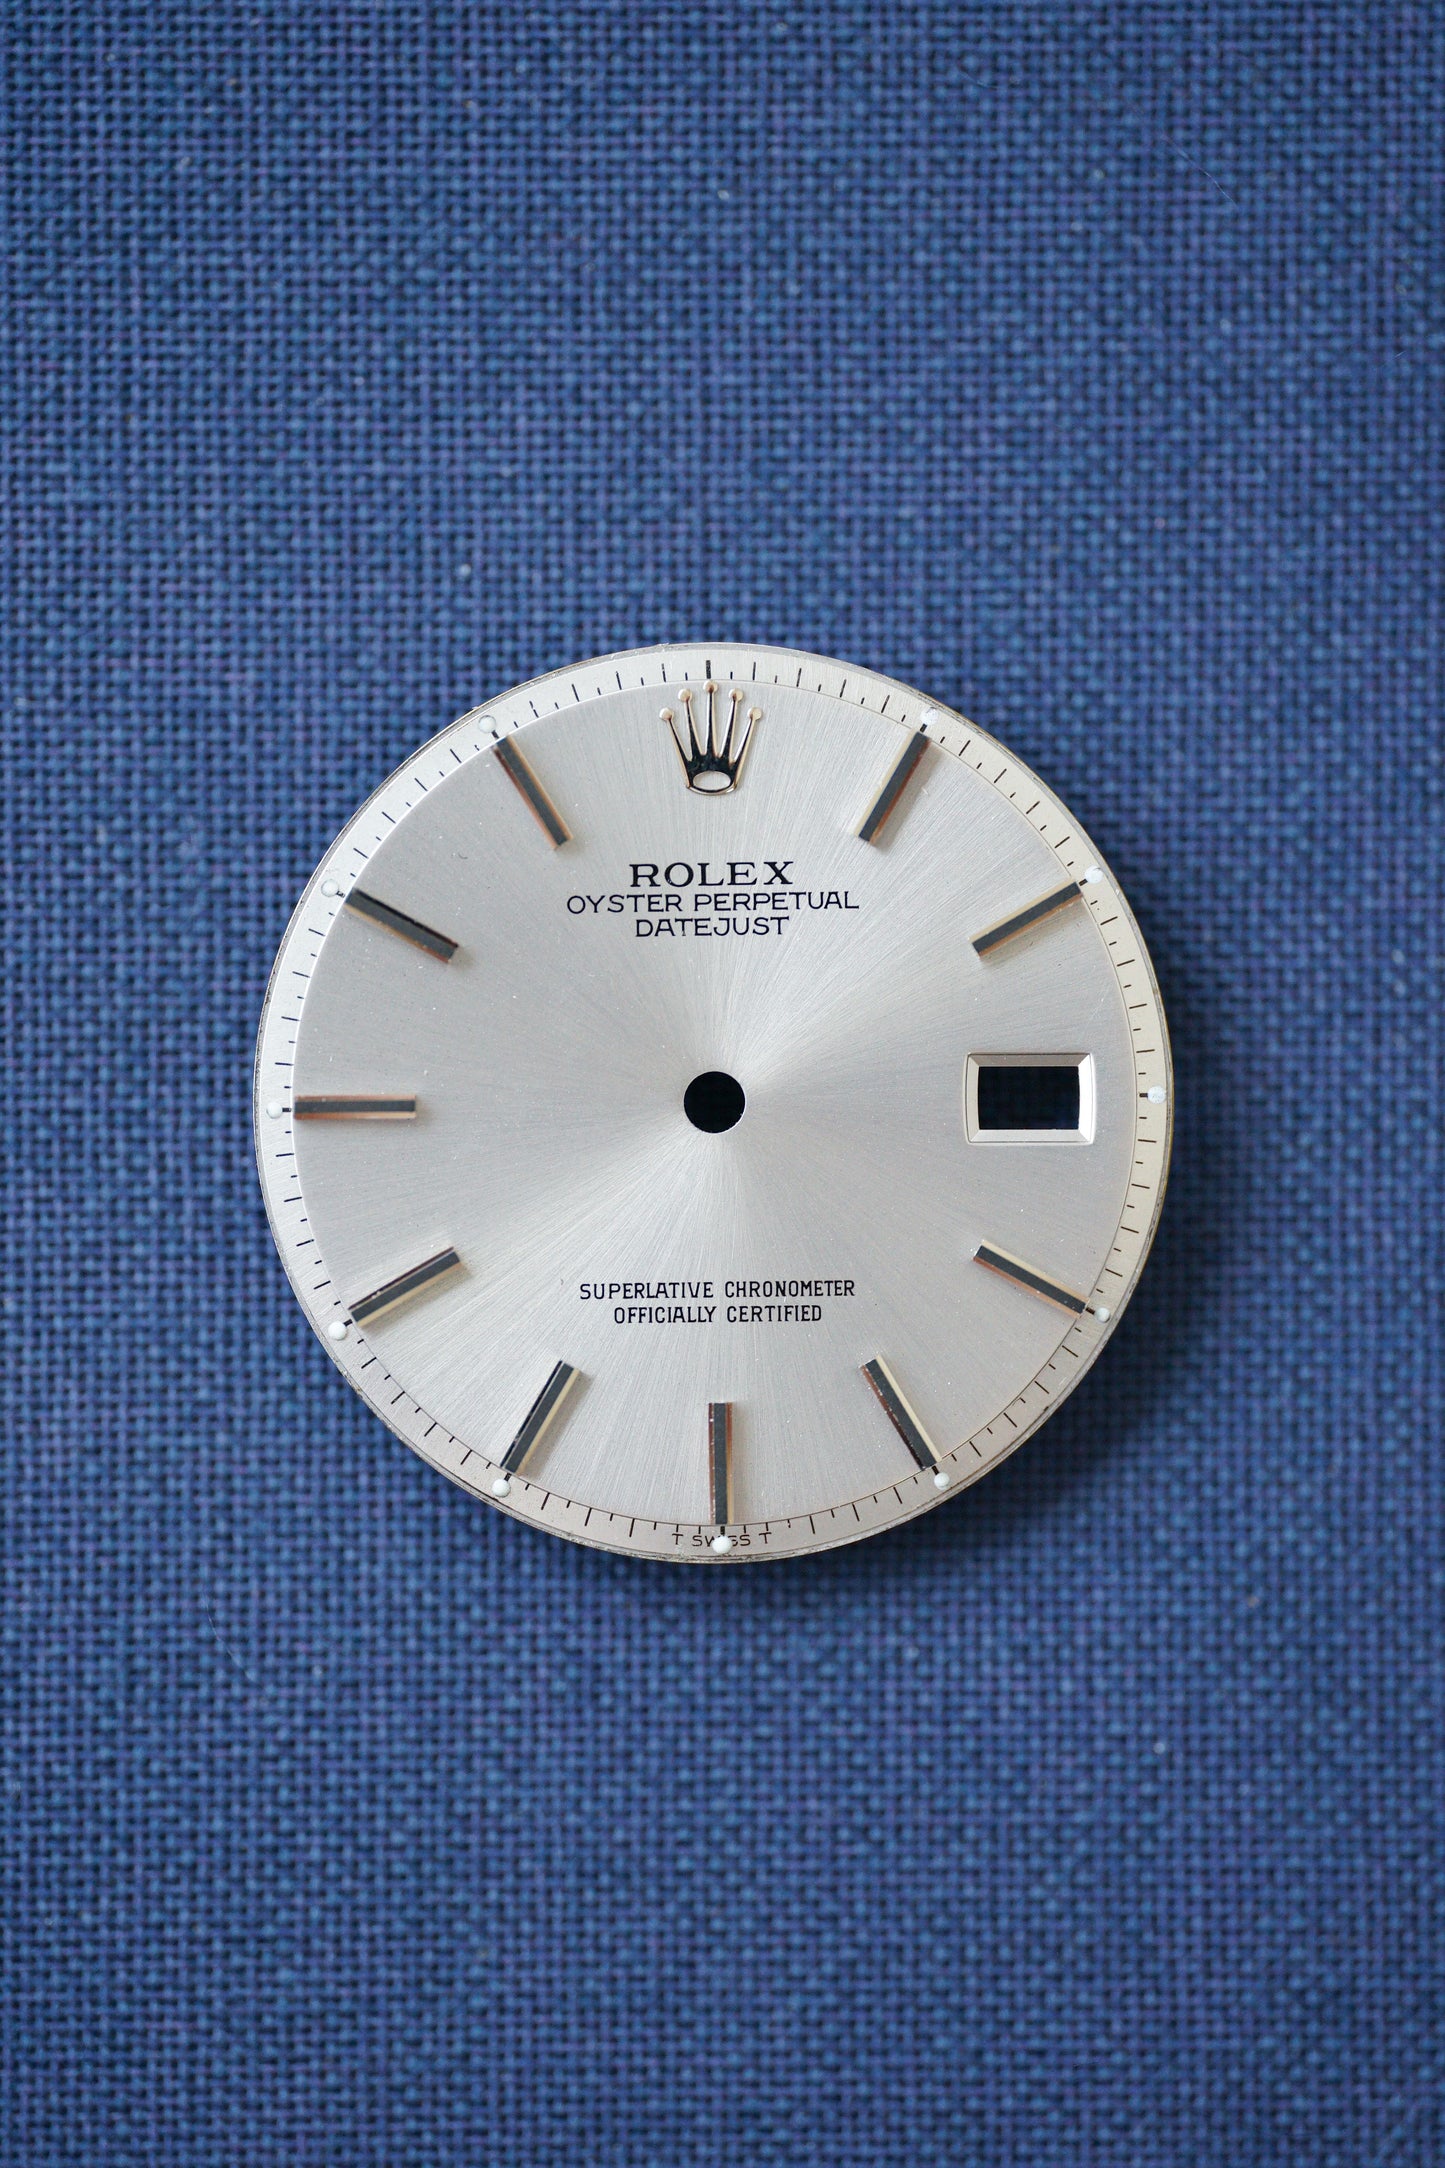 Rolex dial for OP Datejust 36 mm 1600 / 1601 / 1603 